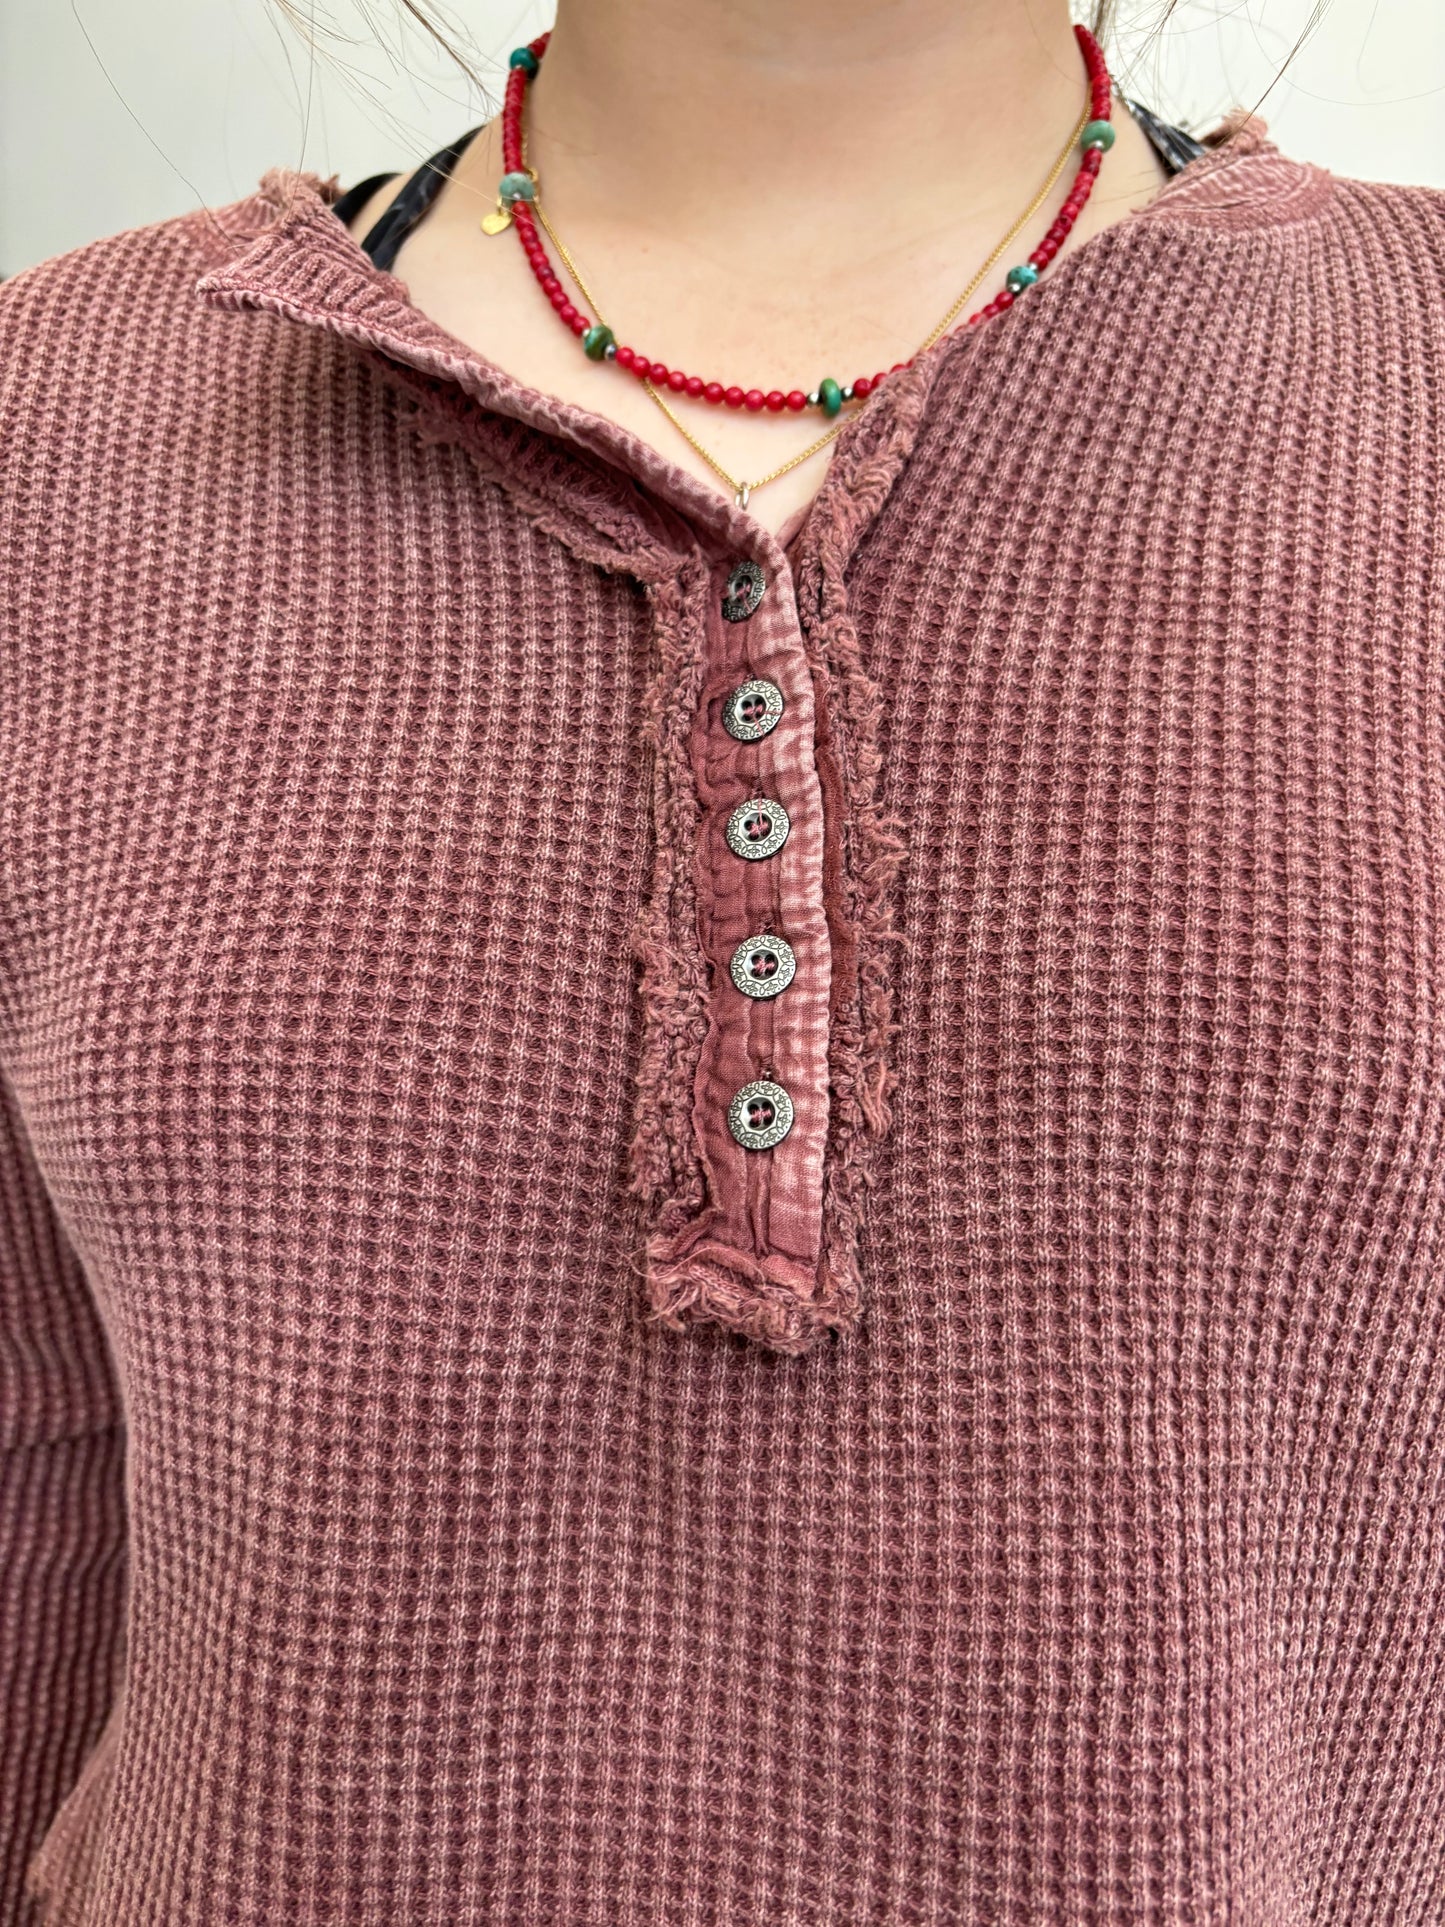 The Indie Waffle Knit Vintage Button Up